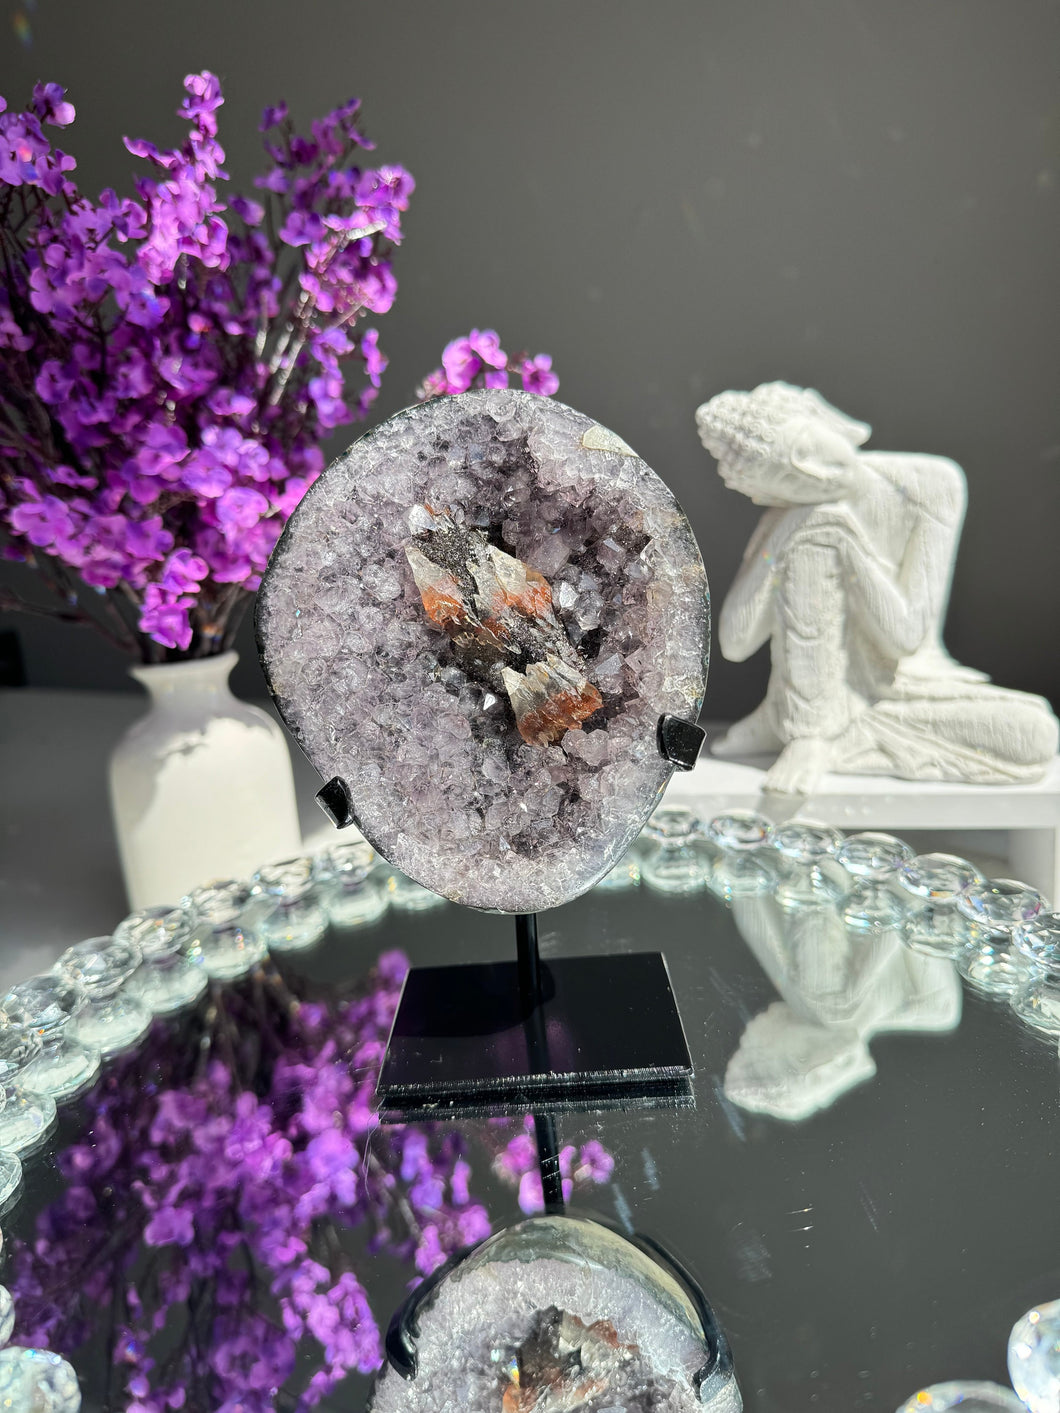 Amethyst geode with calcite and hematite Healing crystals 2765